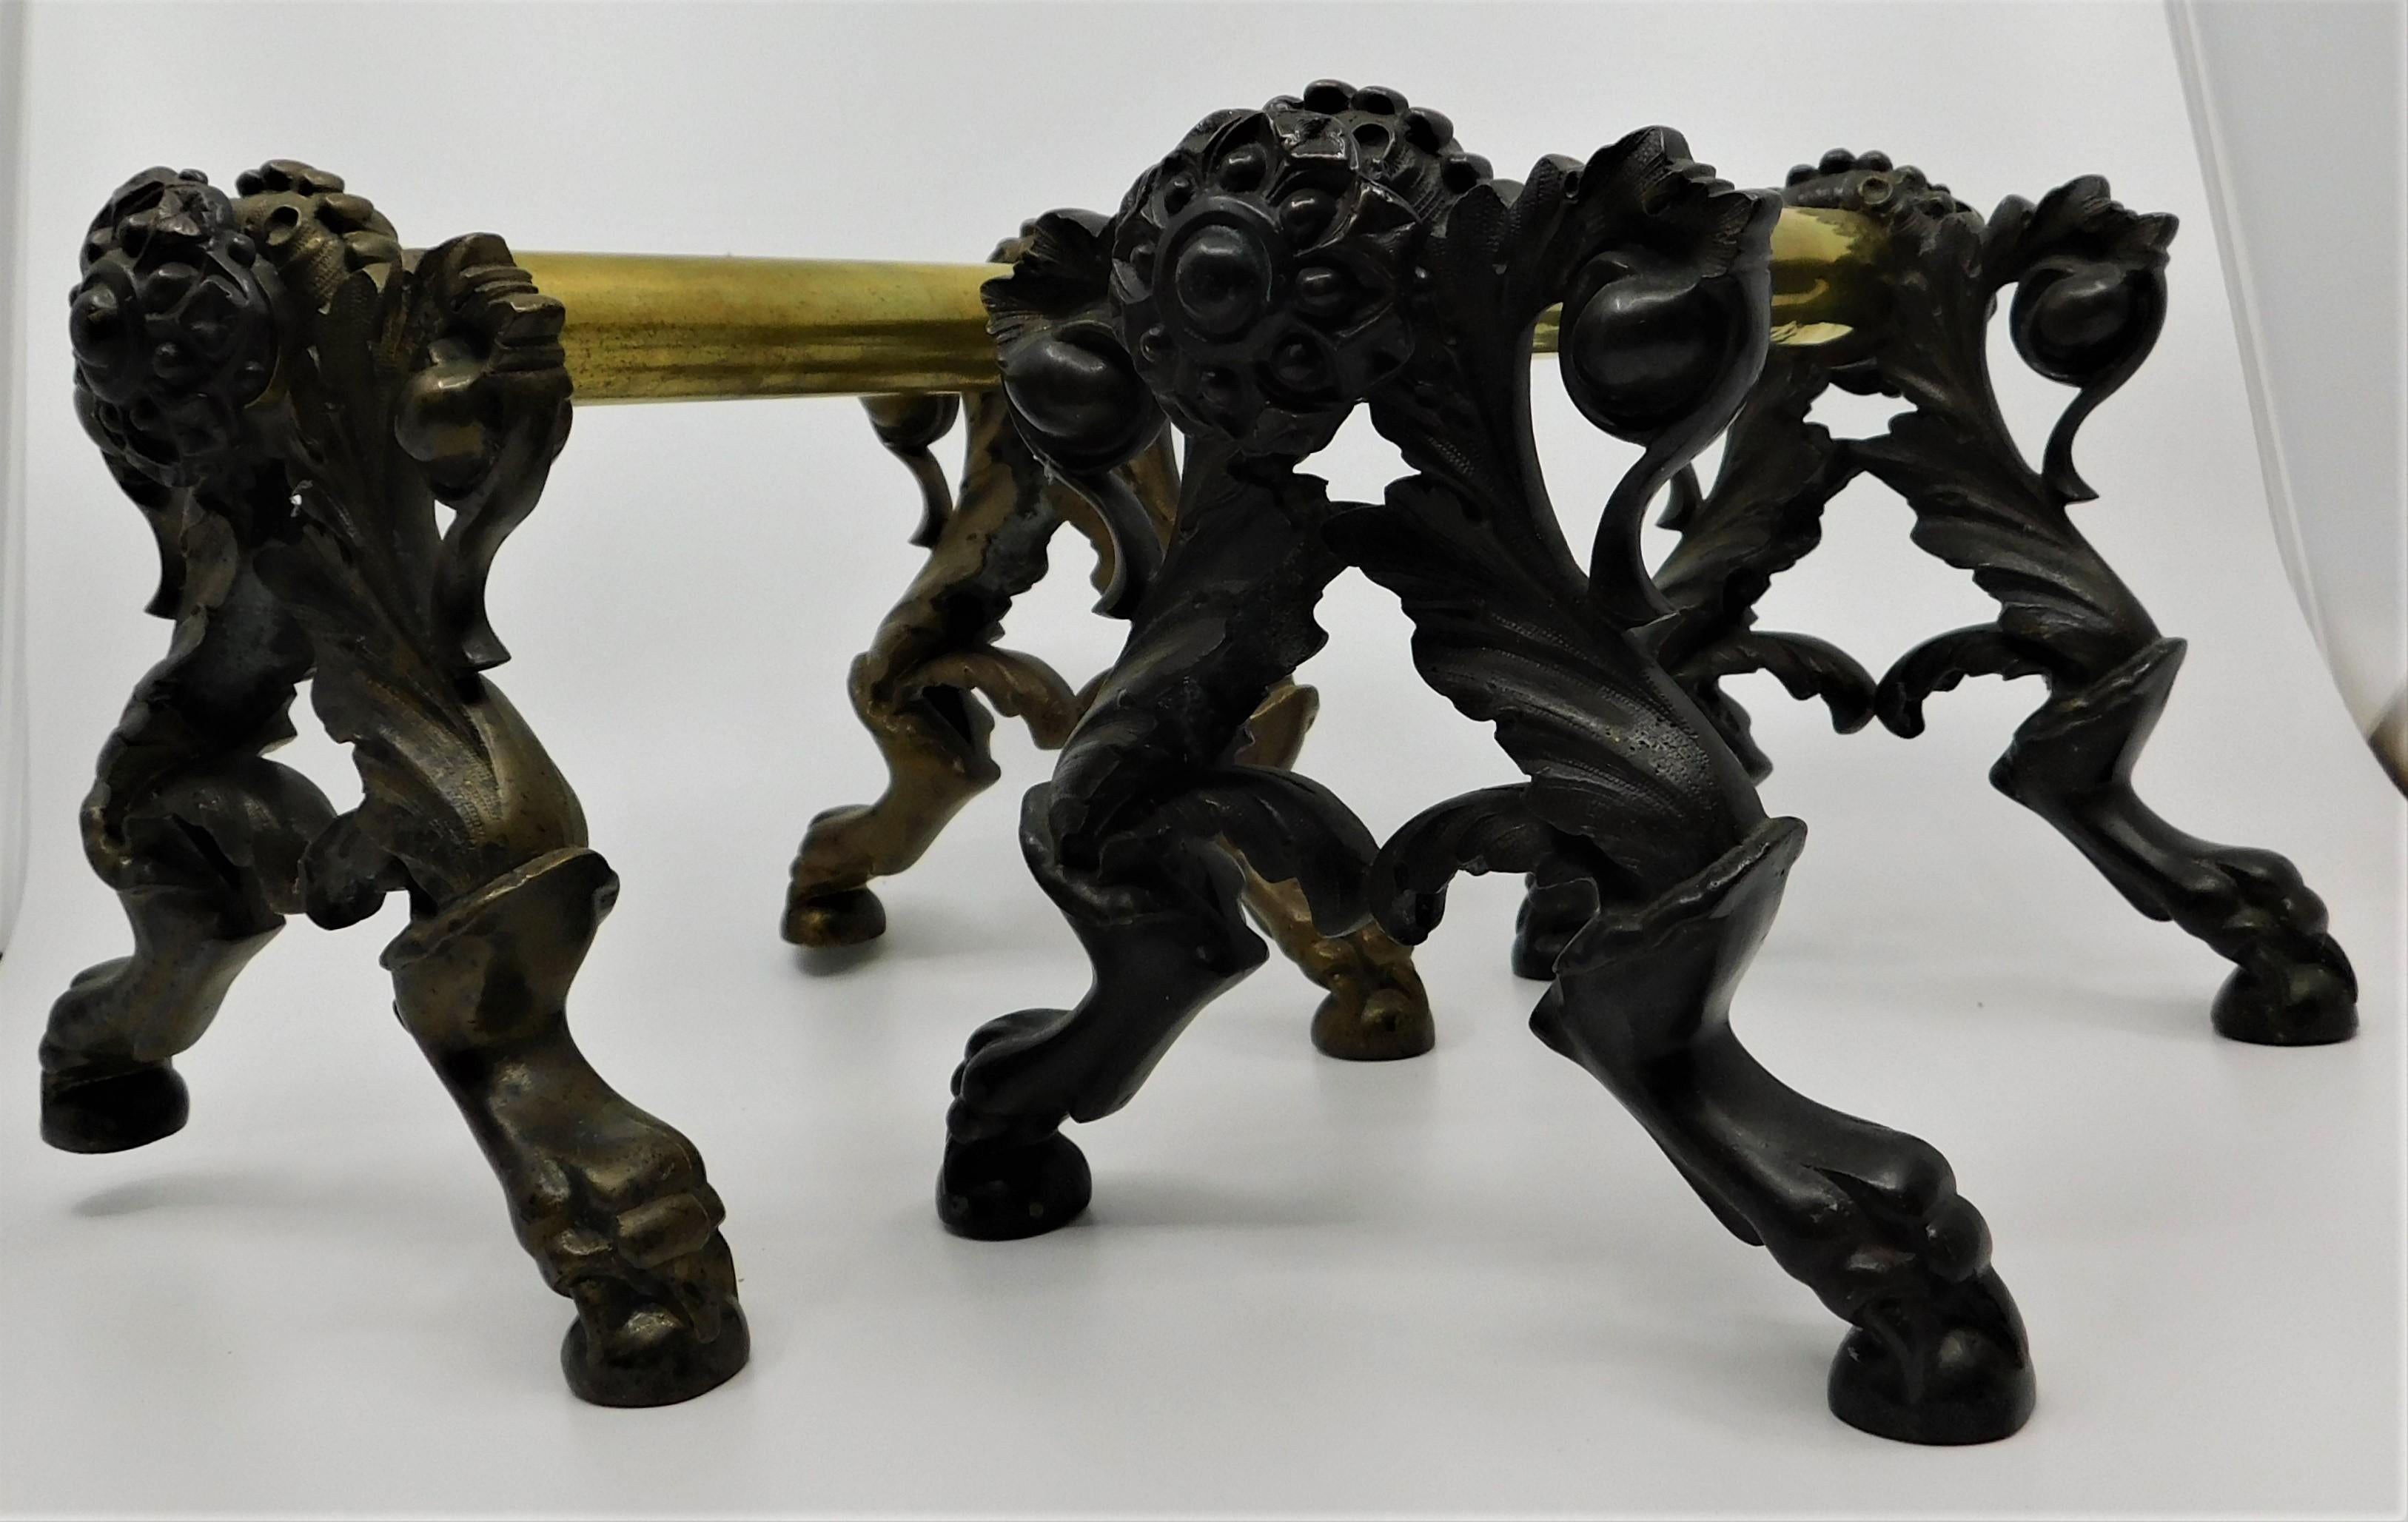 American pair of ornate fireplace tool rests/holders, circa 1890 for being able to lay the hearth set above ground level.